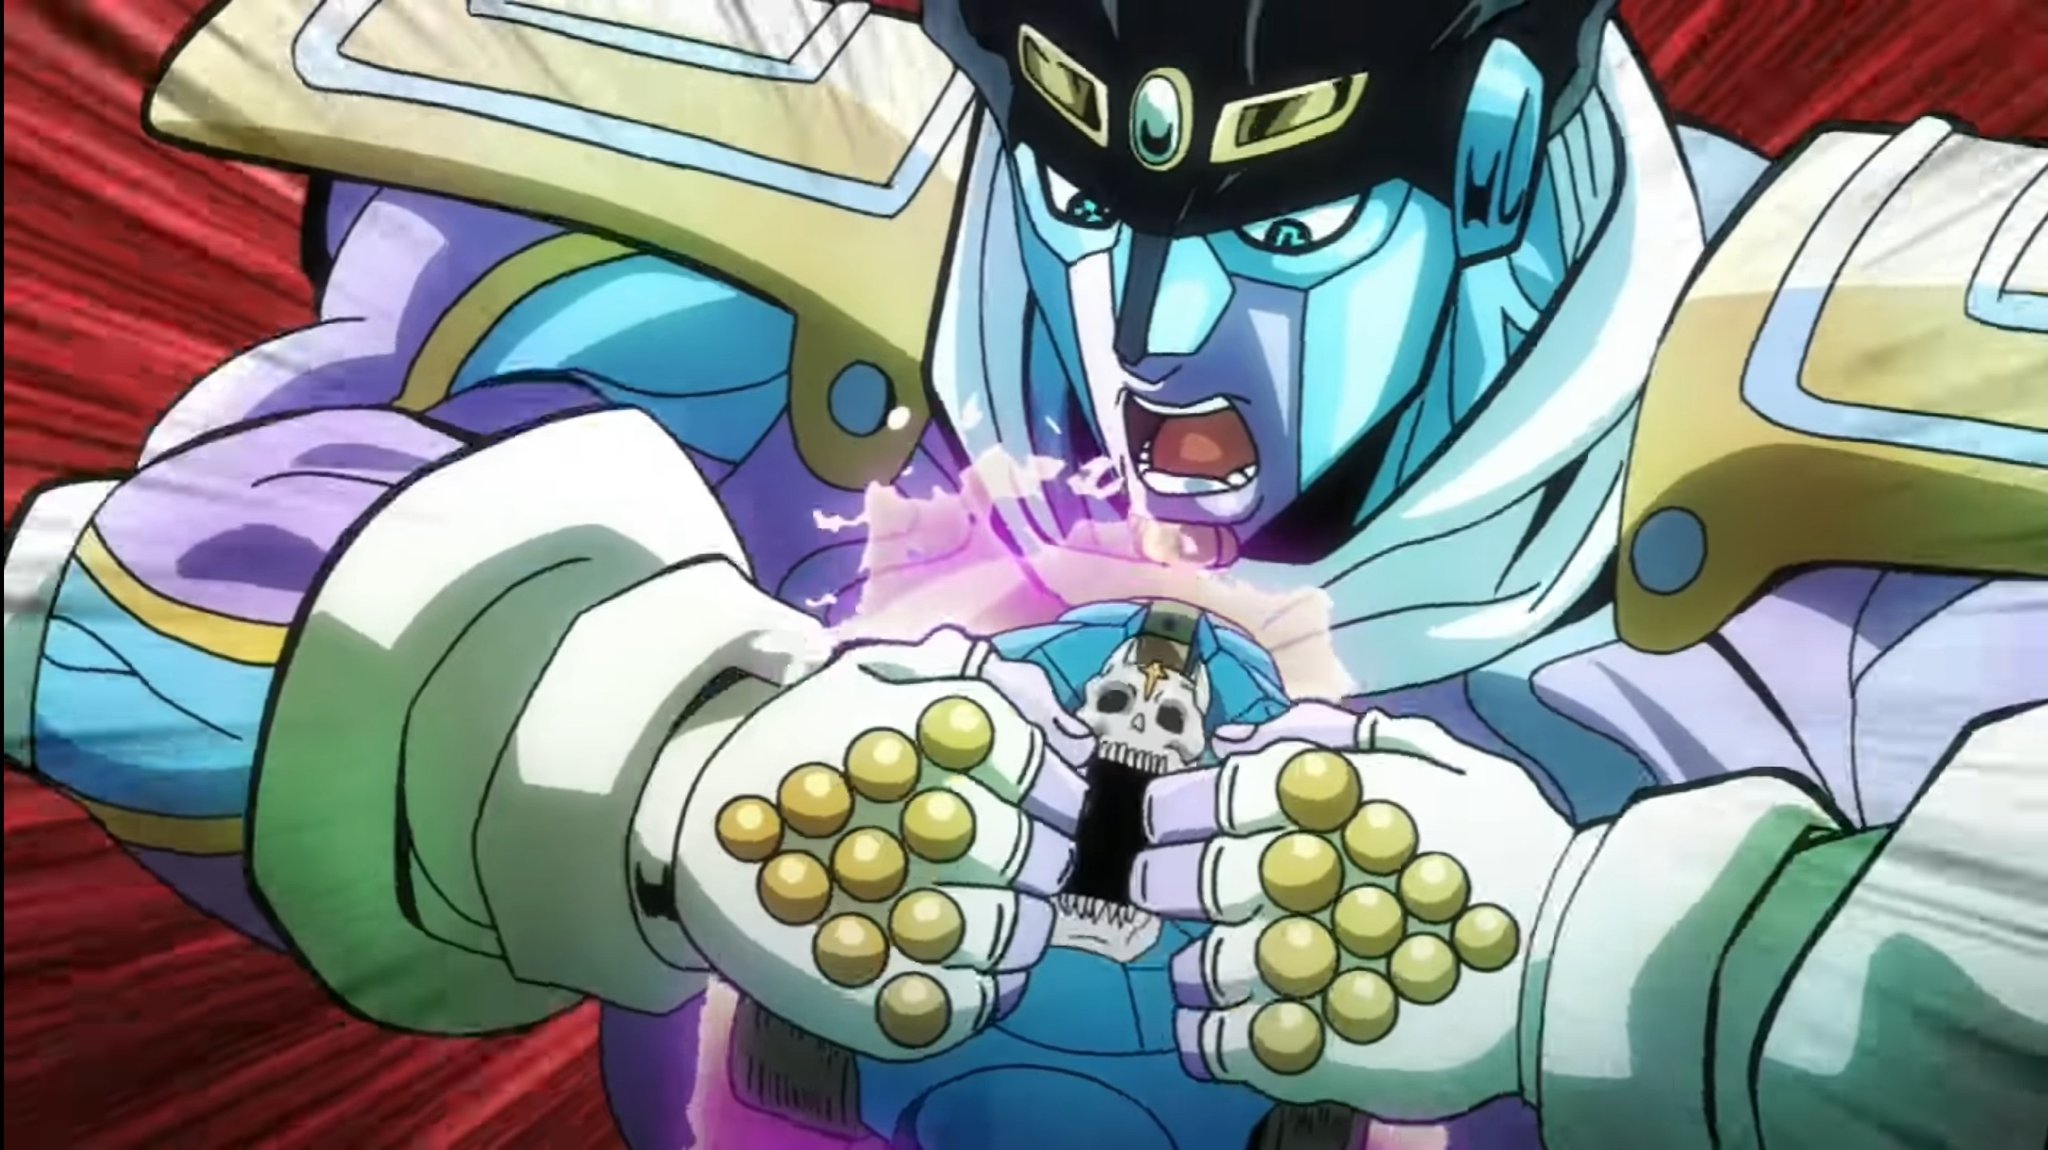 Grayanom on X: Several times during the part 4 anime, star